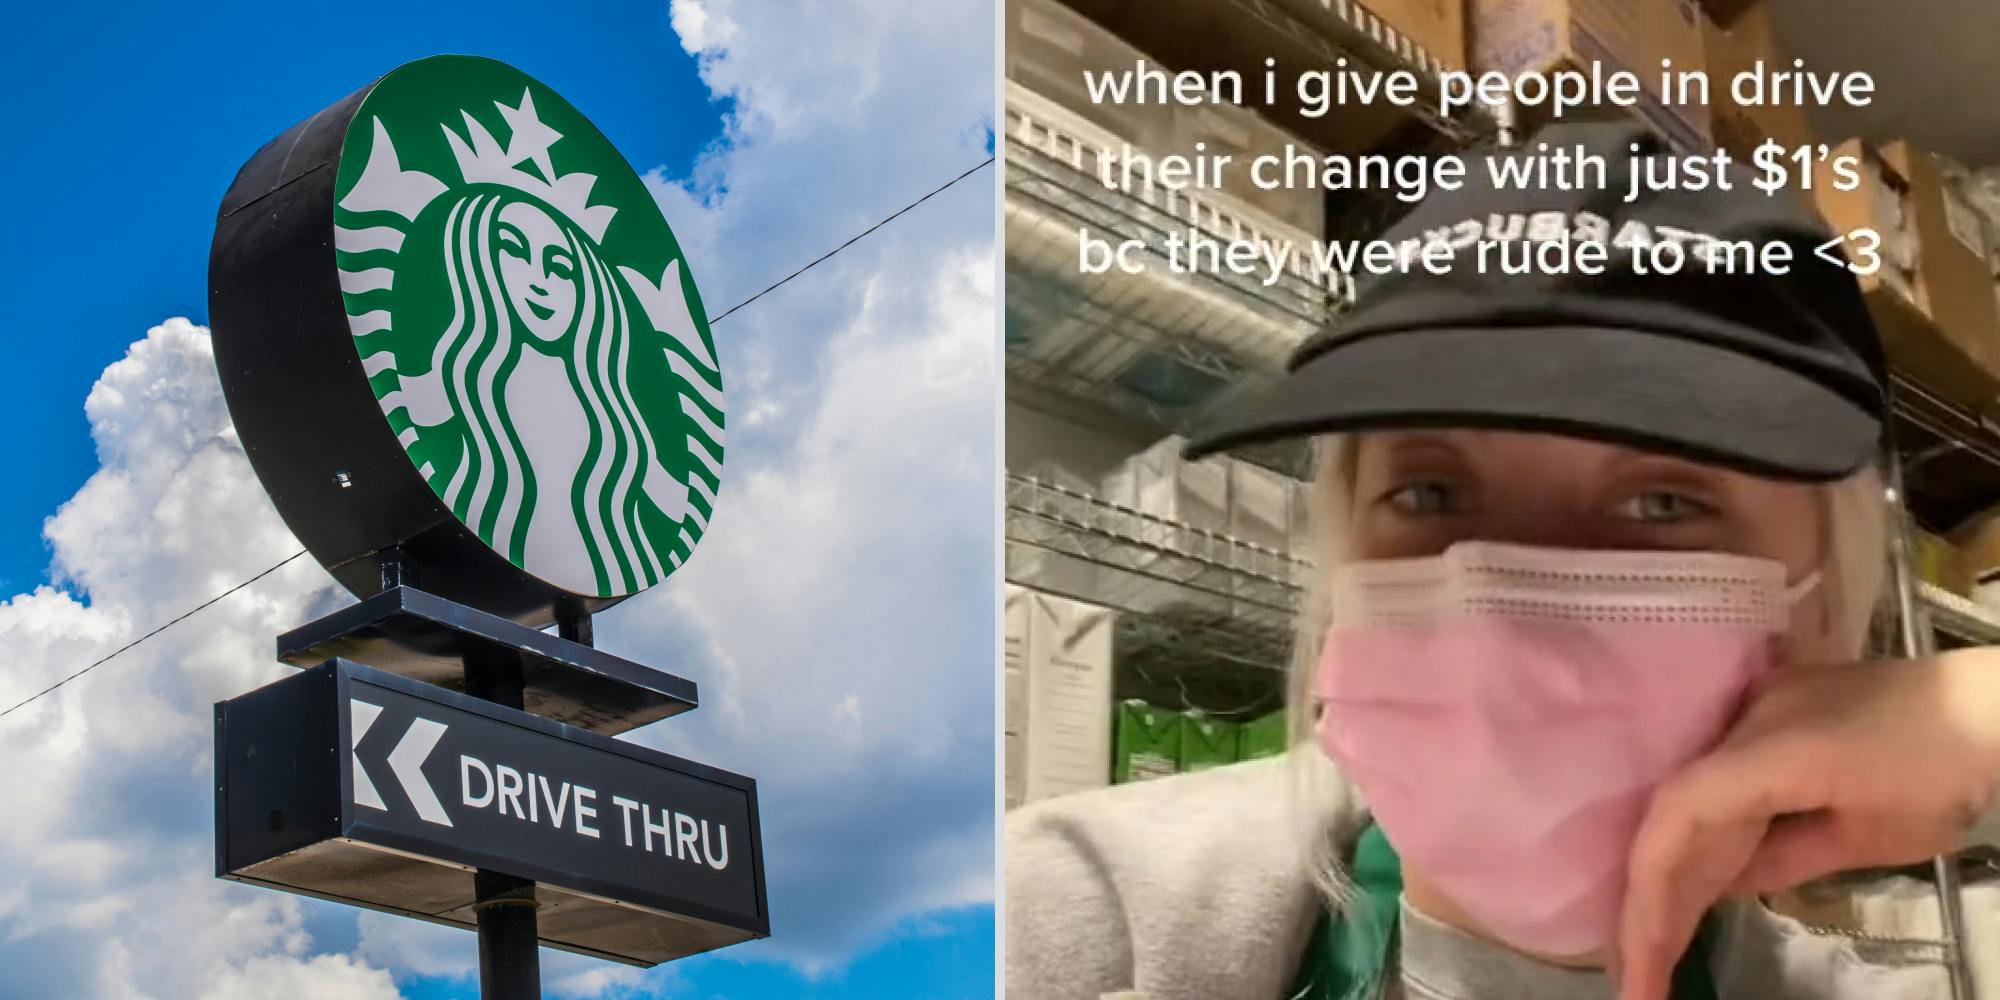 Starbucks drive thru sign with blue skies and white clouds (l) Starbucks barista caption ' when i give people in drive their change with just $1's bc they were rude to me heart' (r)